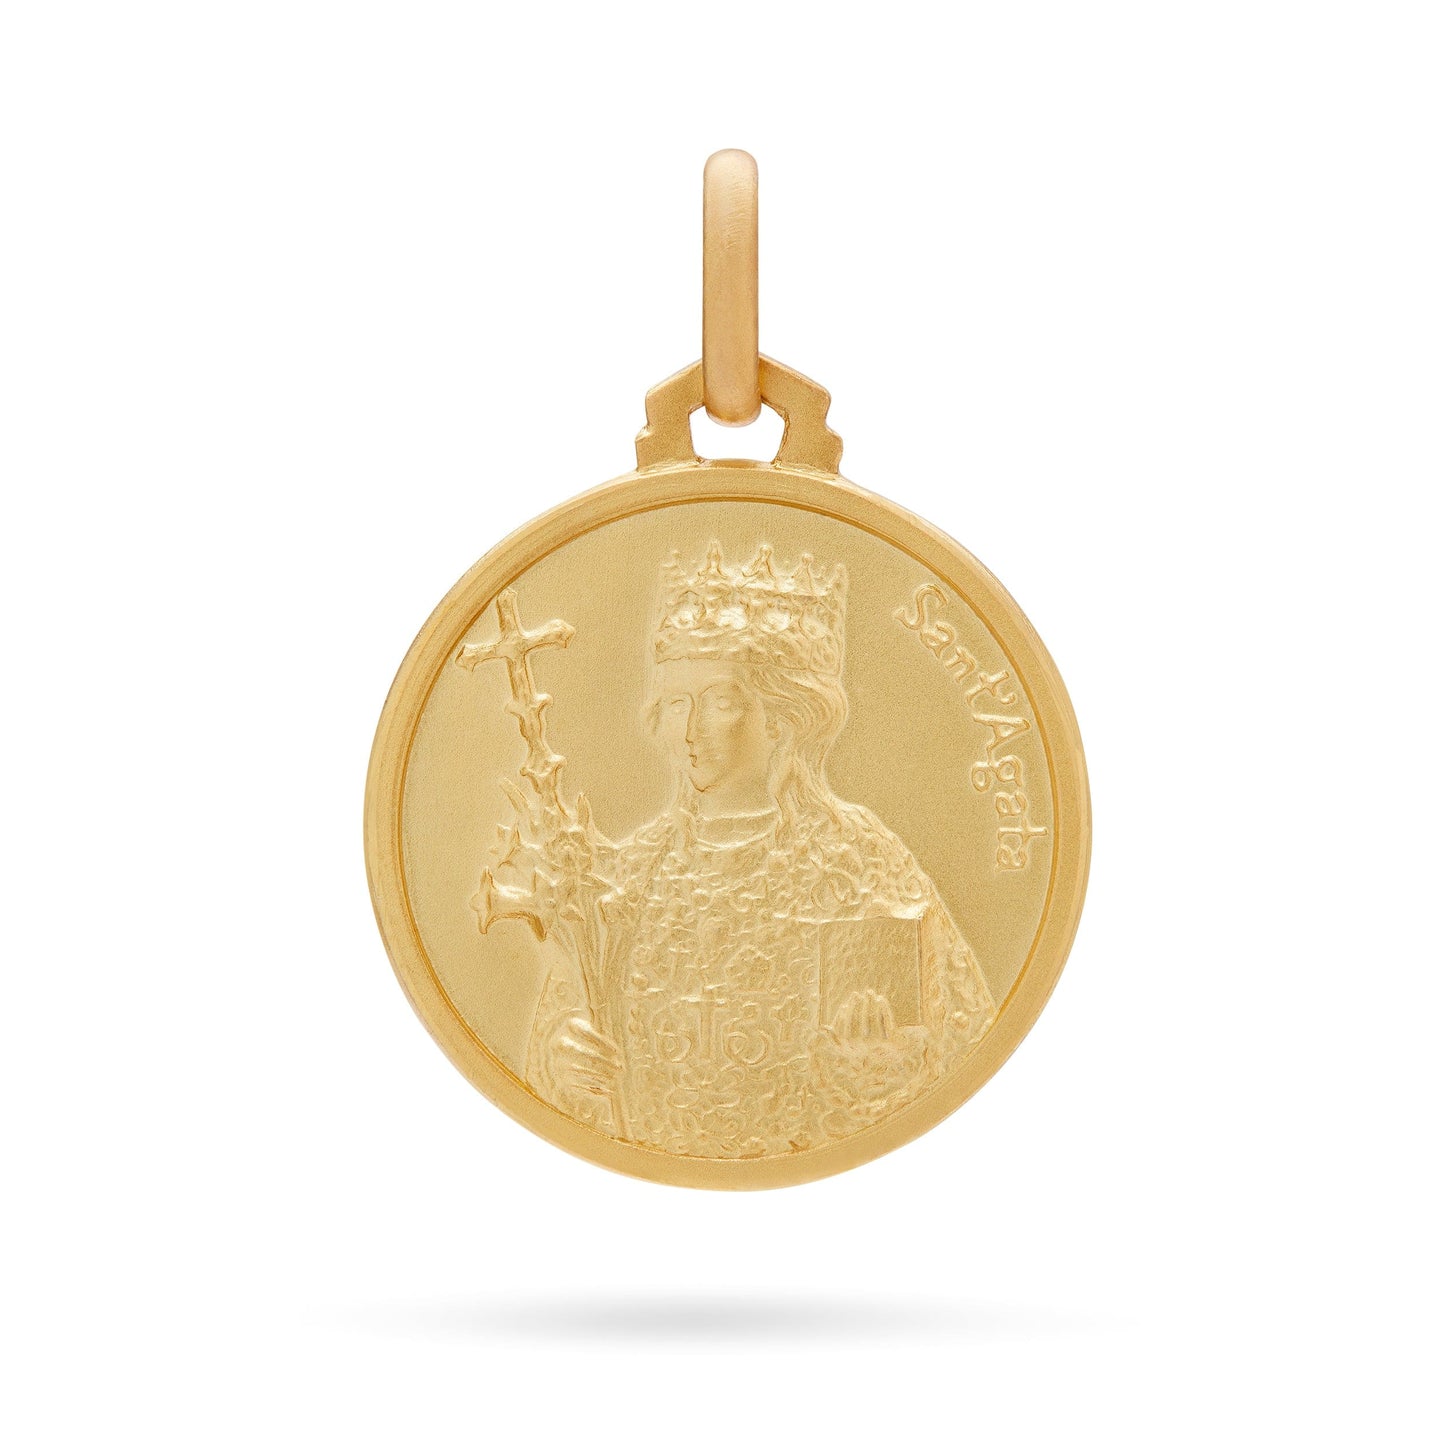 MONDO CATTOLICO Jewelry 18 mm (0.70 in) Yellow Gold Medal of Agatha